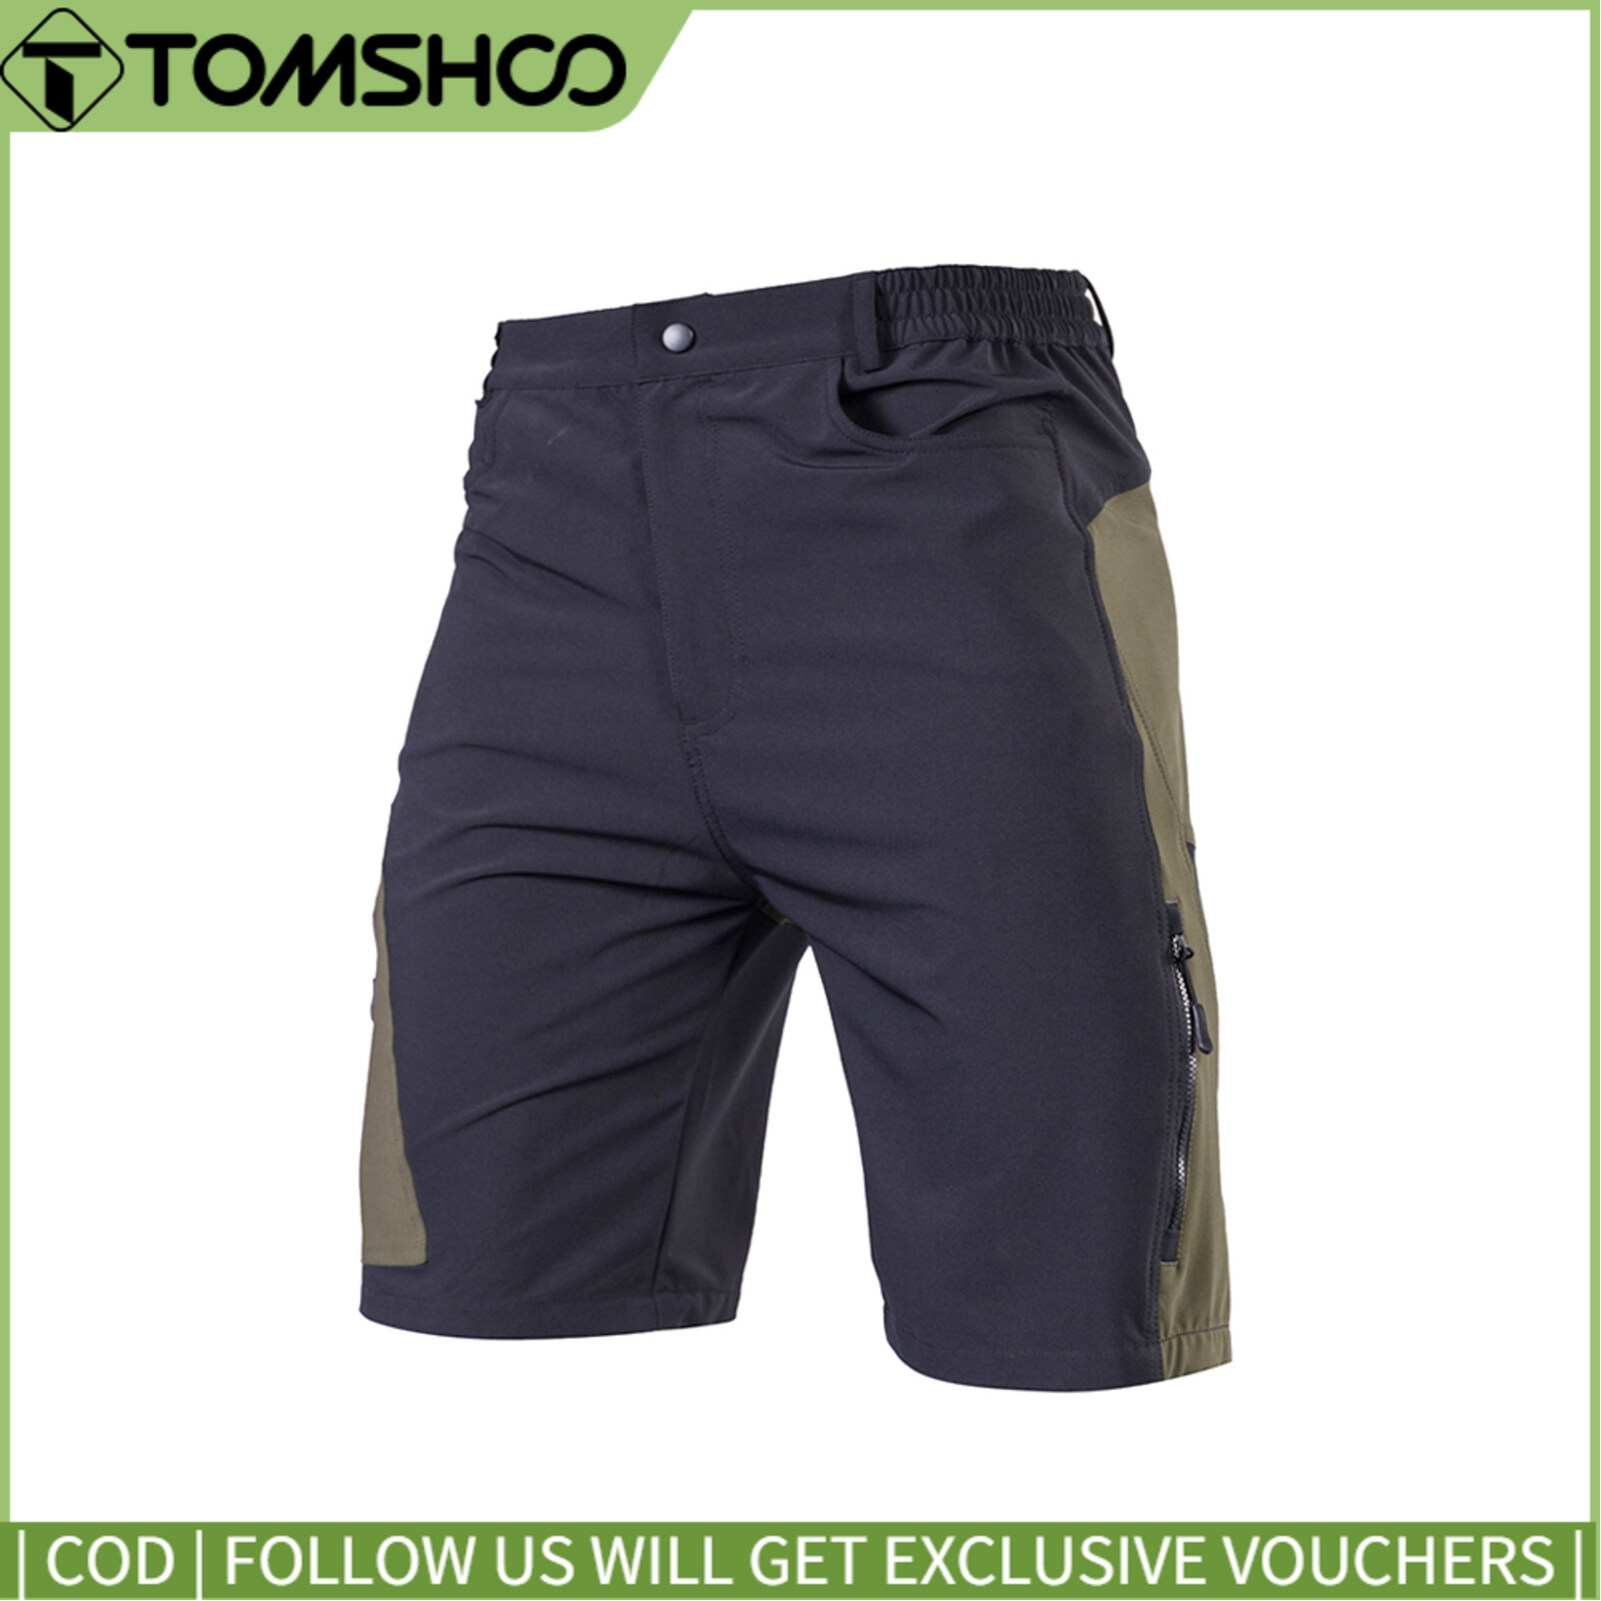 TOMSHOO Men s Baggy Cycling Shorts Breathable Loose